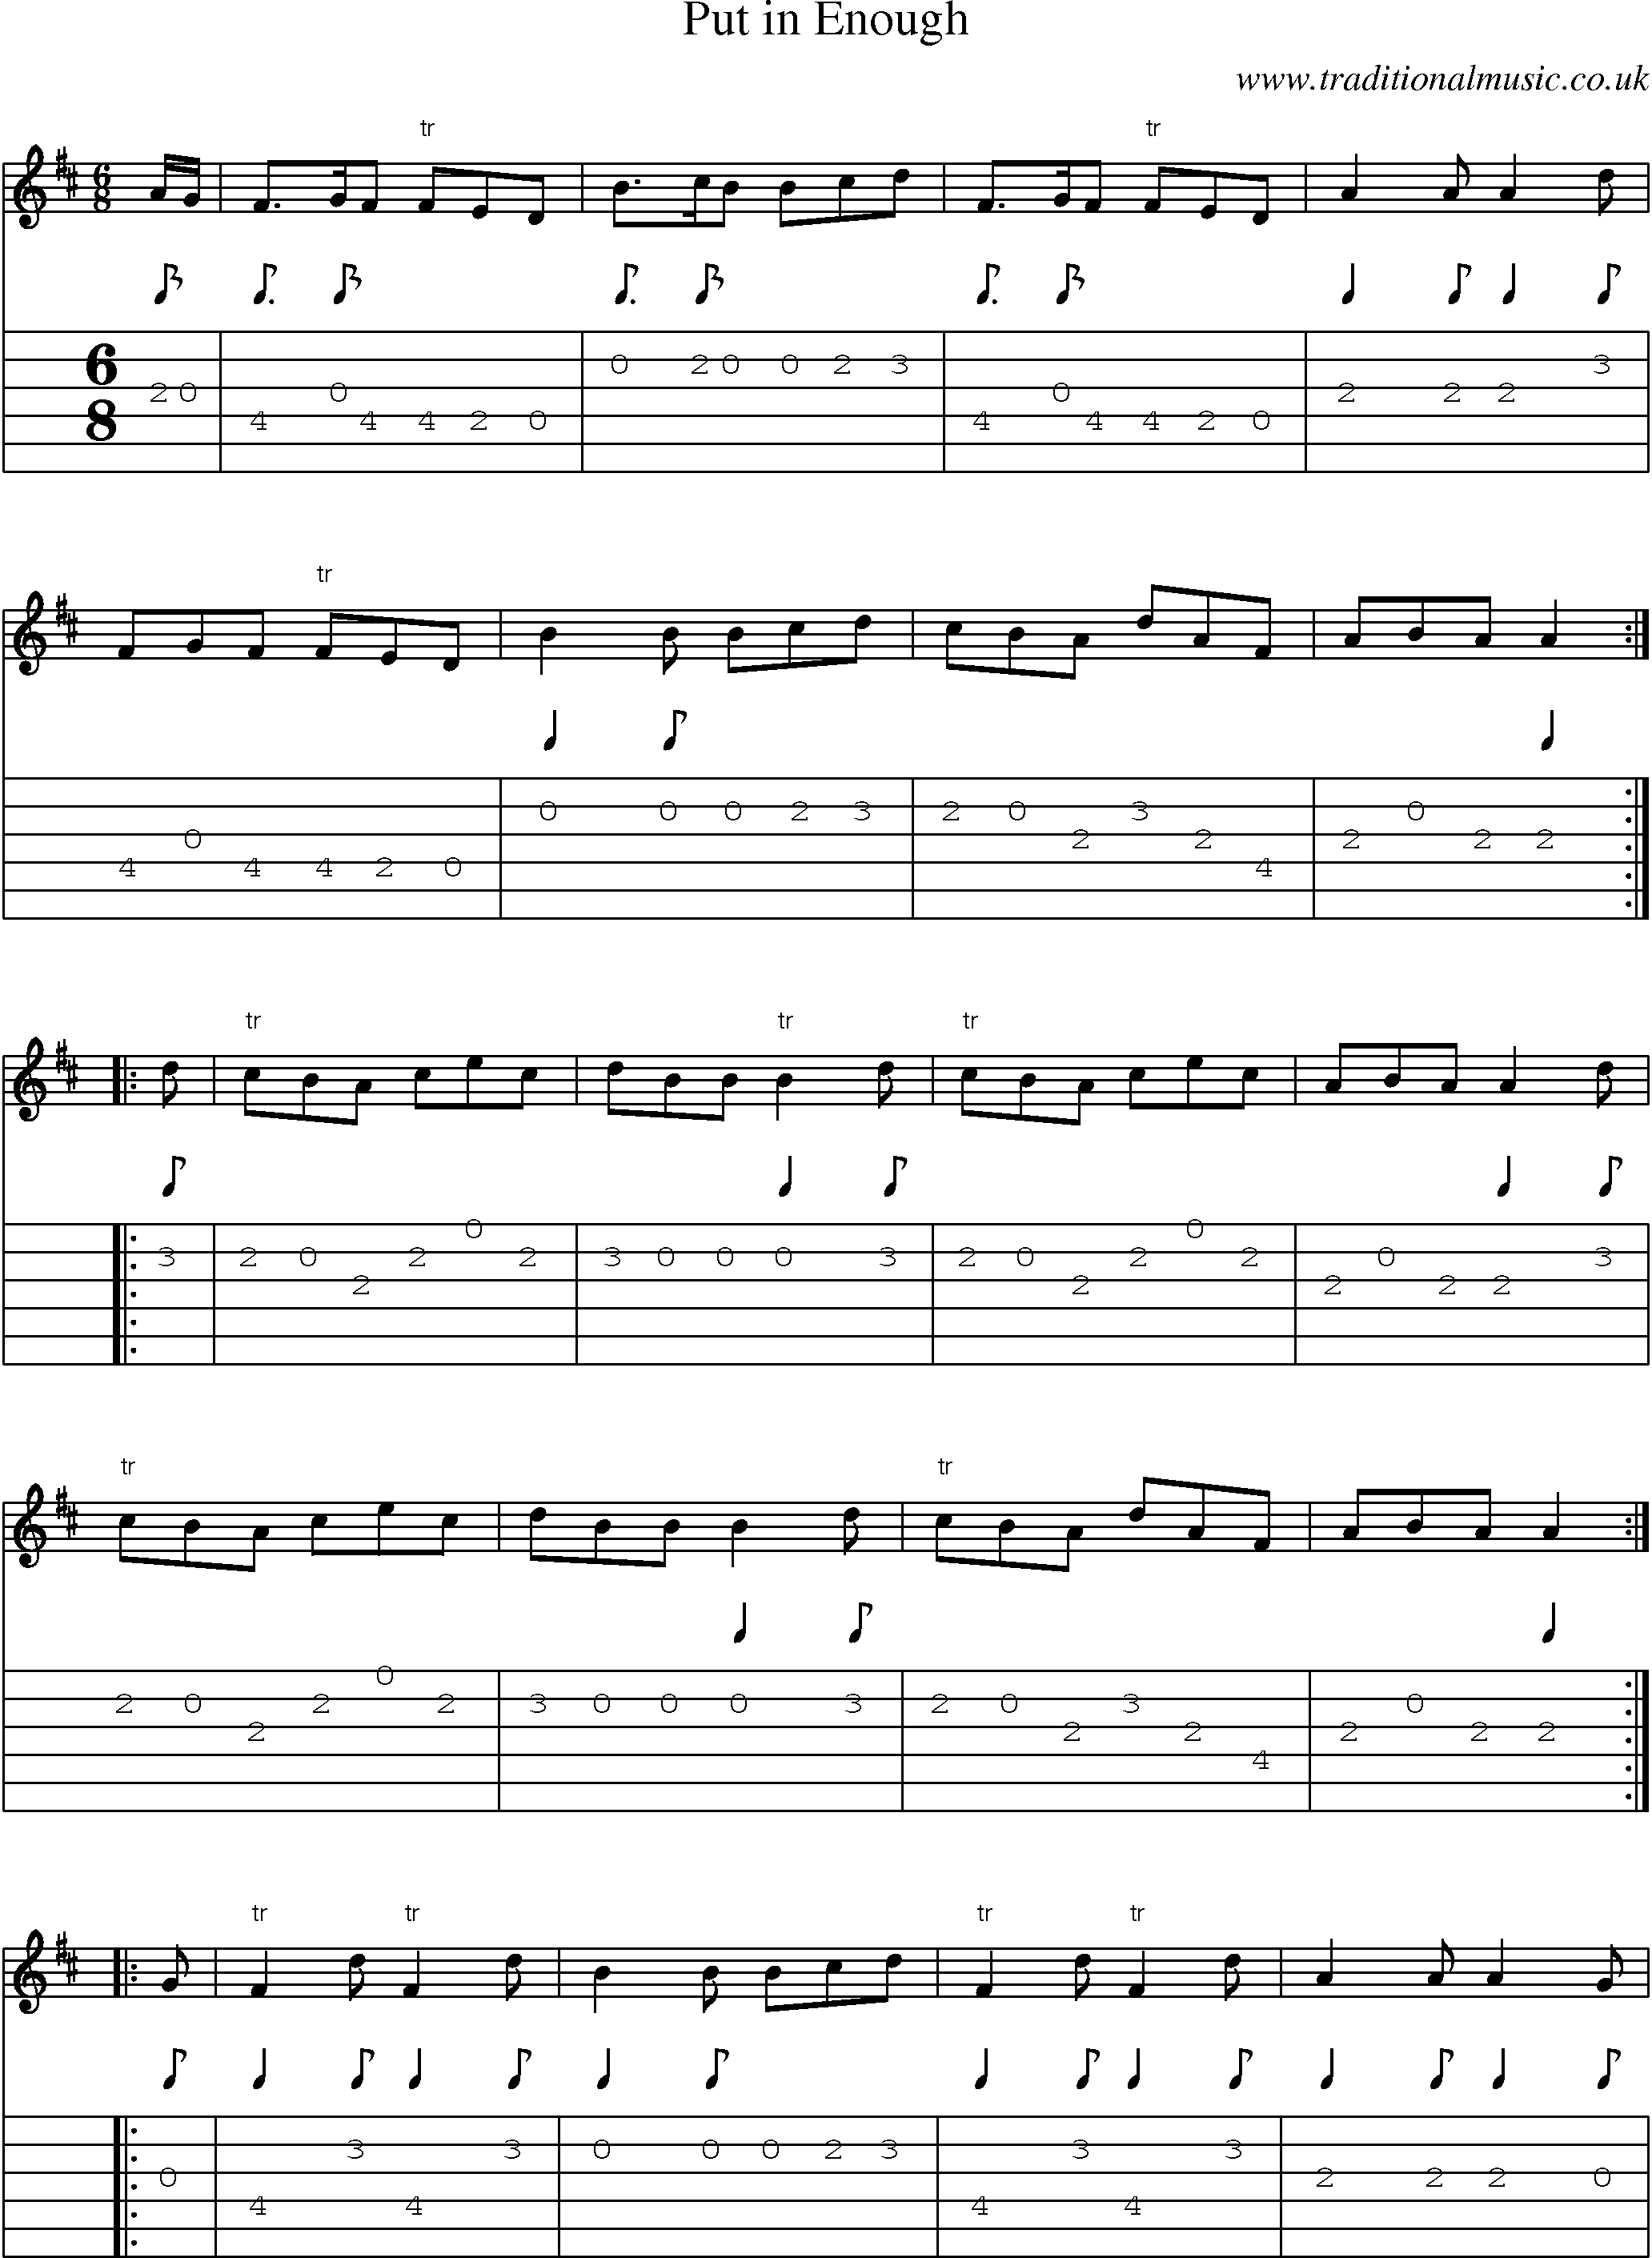 Music Score and Guitar Tabs for Put In Enough